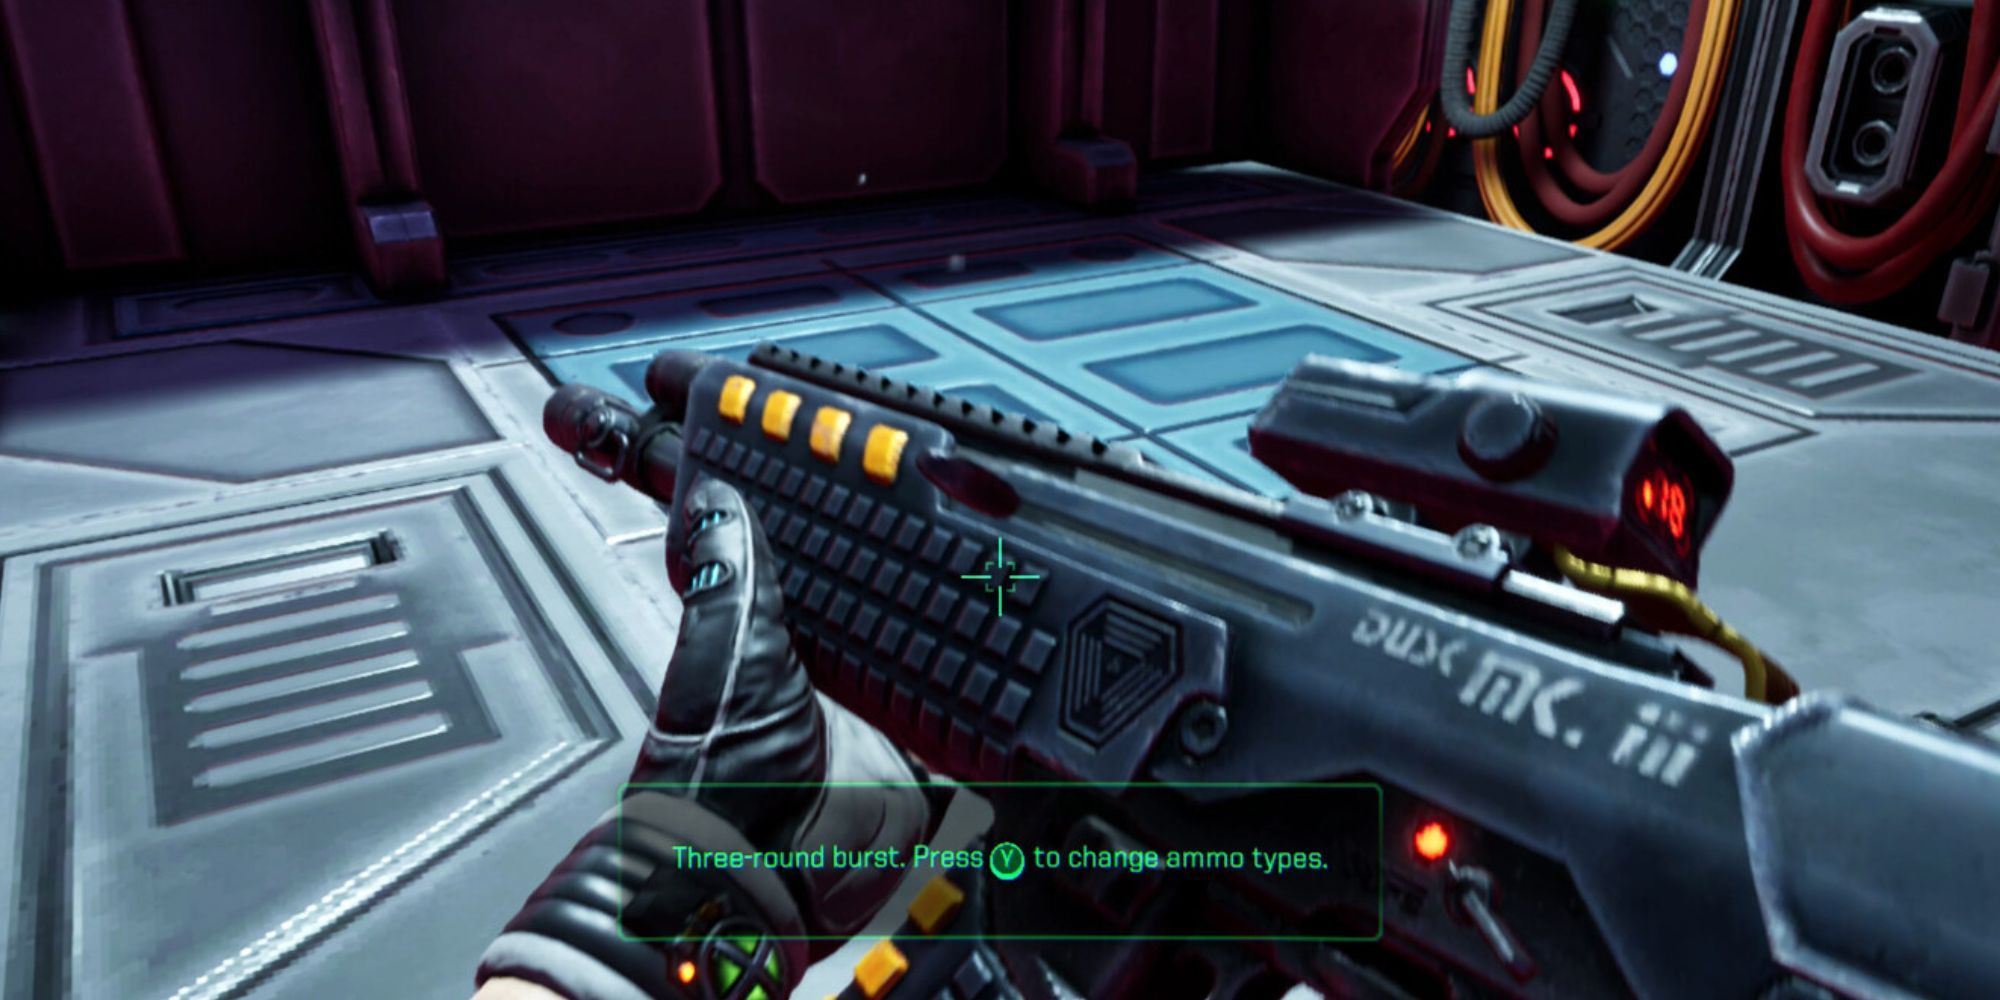 Mark III Assault Rifle by System Shock.